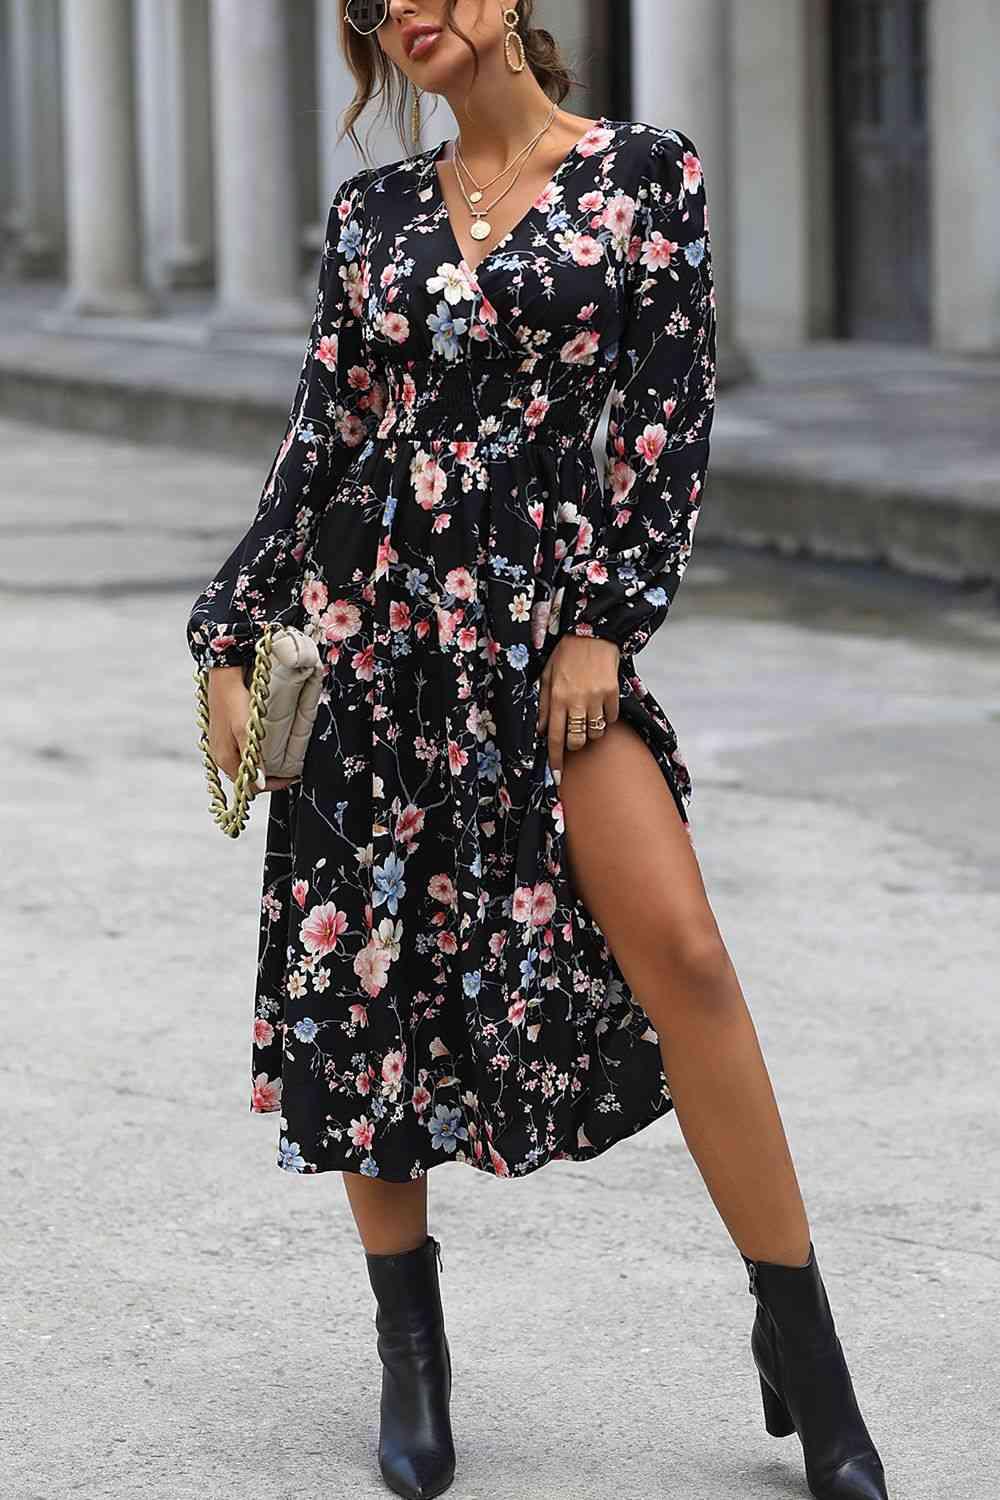 a woman wearing a black floral dress and black cowboy boots